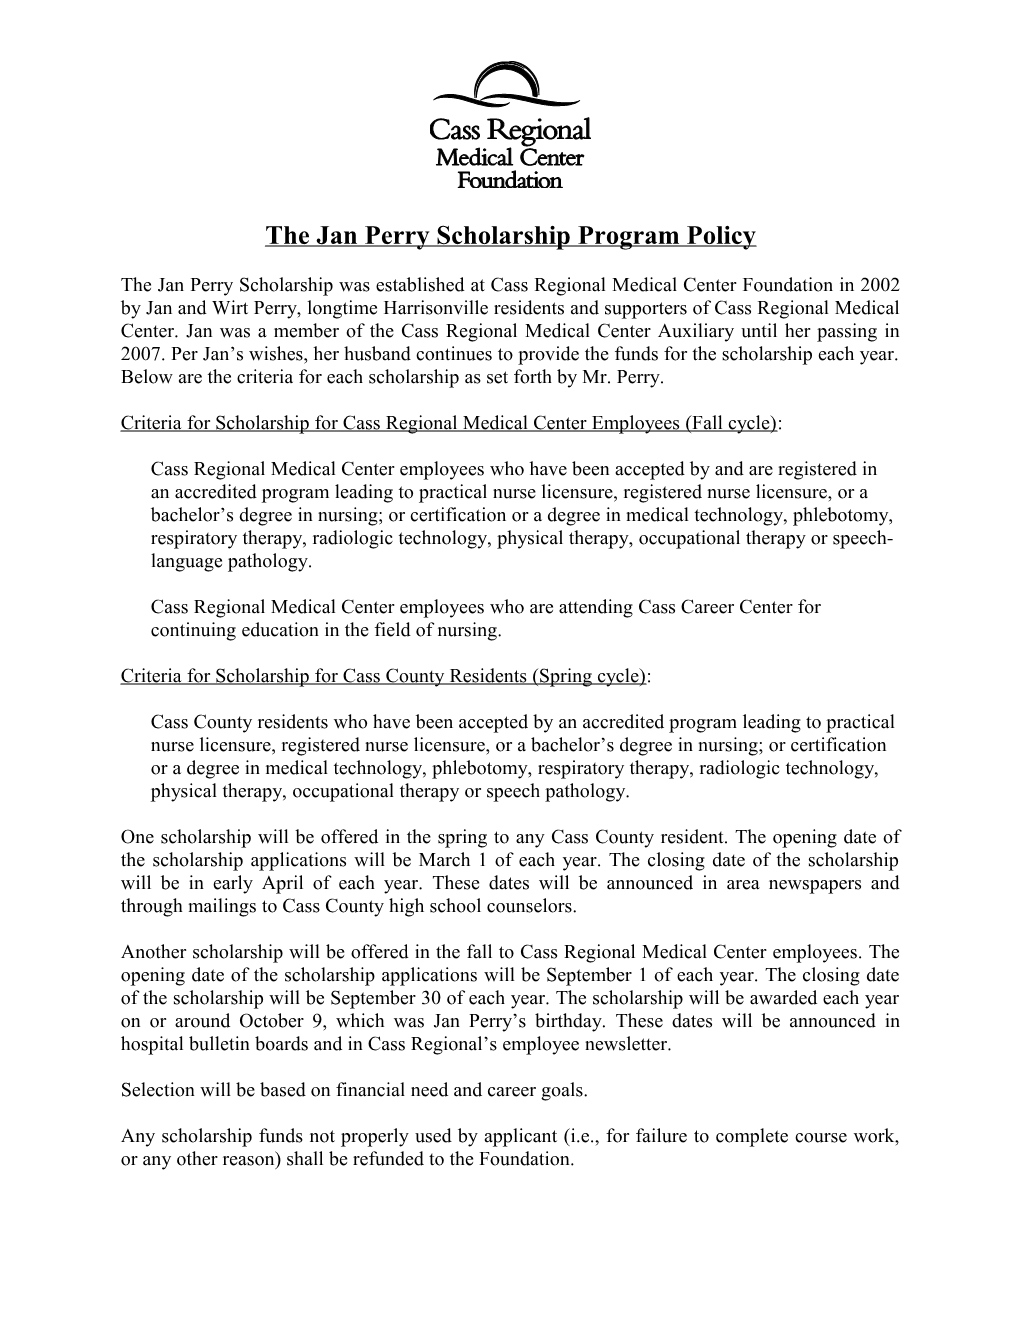 The Jan Perry Scholarship Program Policy